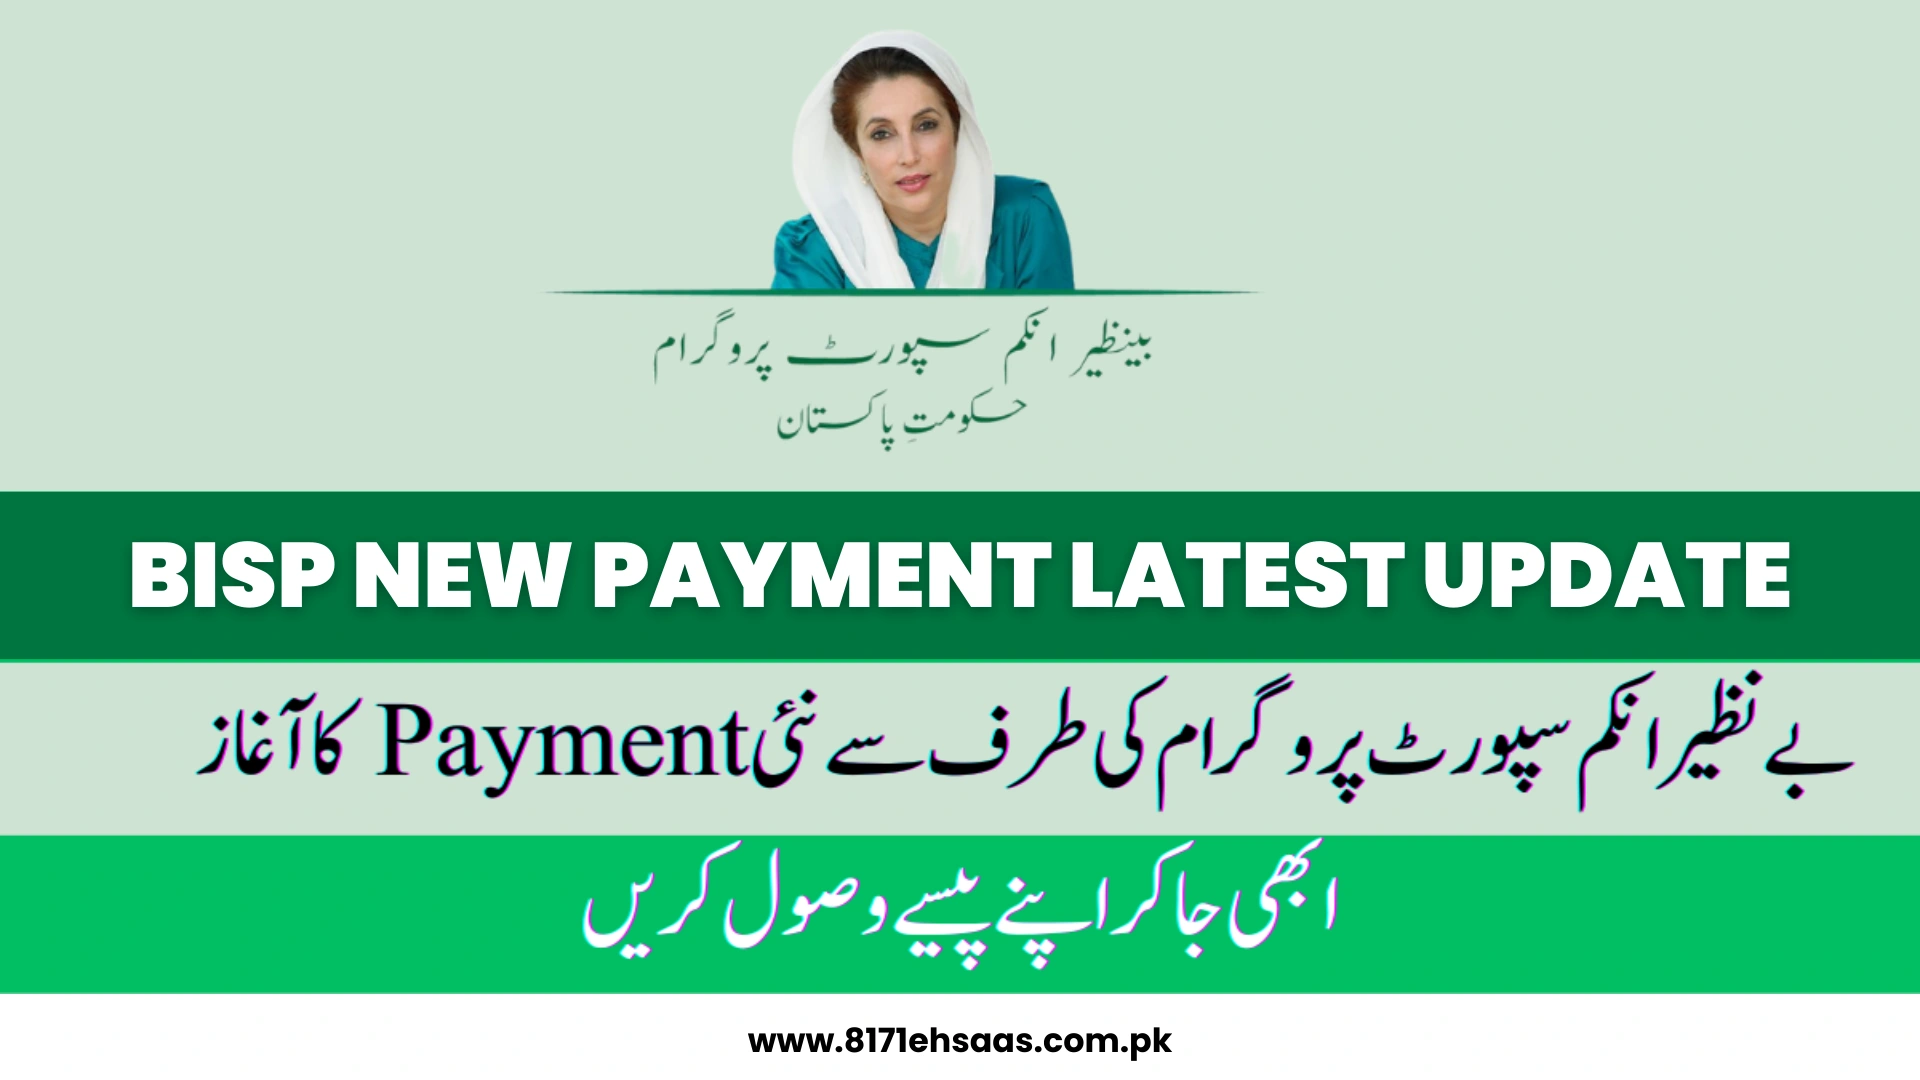 BISP New Payment Latest Update